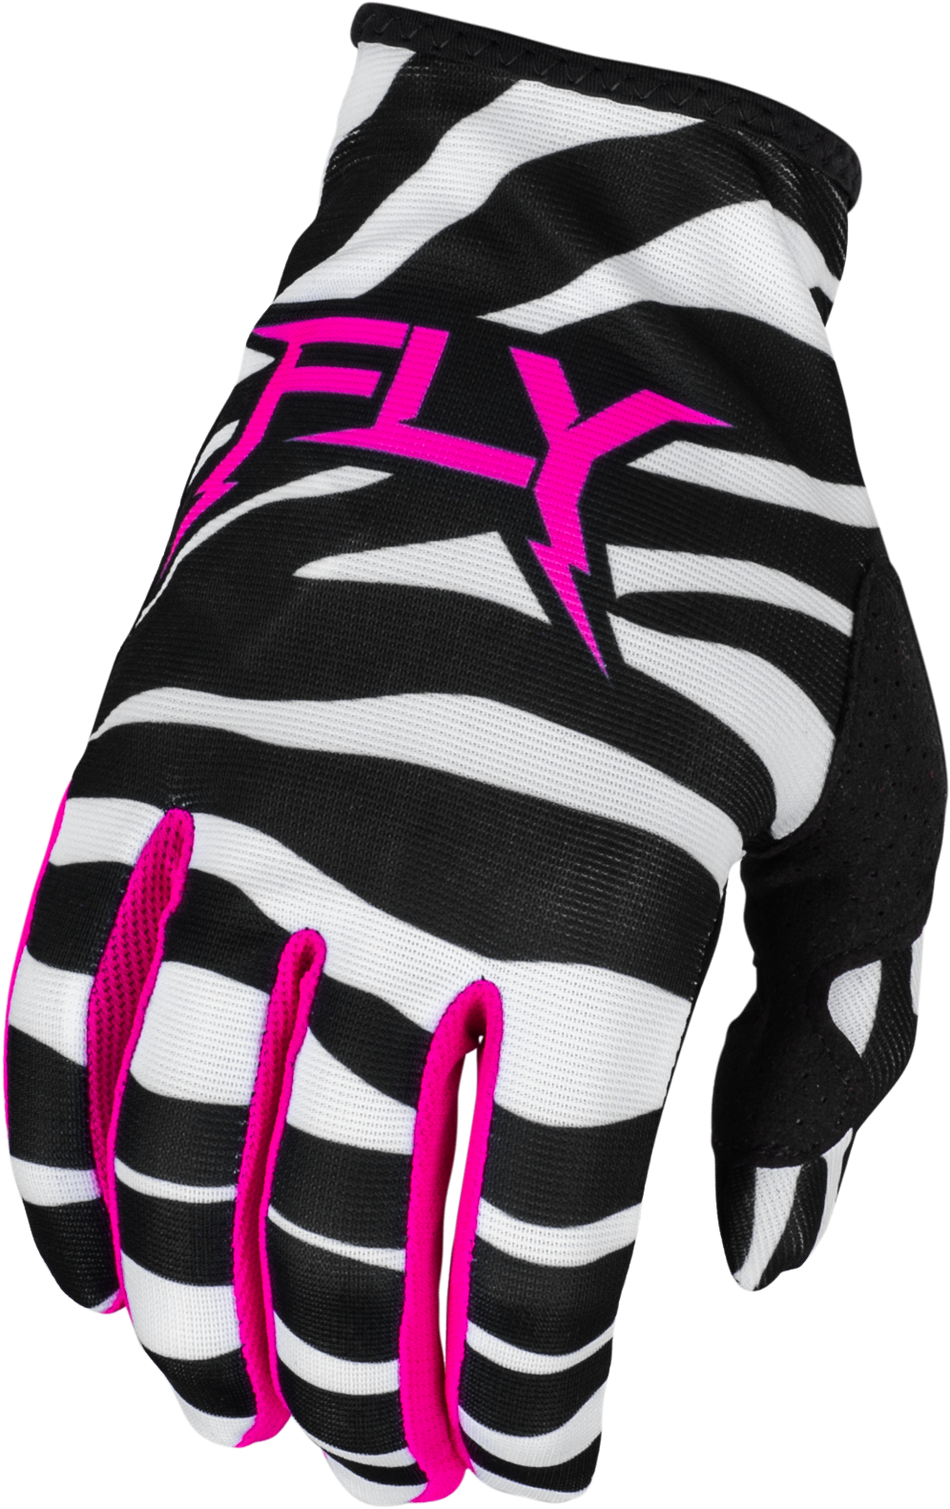 FLY RACING Lite Uncaged Gloves Black/White/Neon Pink 2x 377-7412X